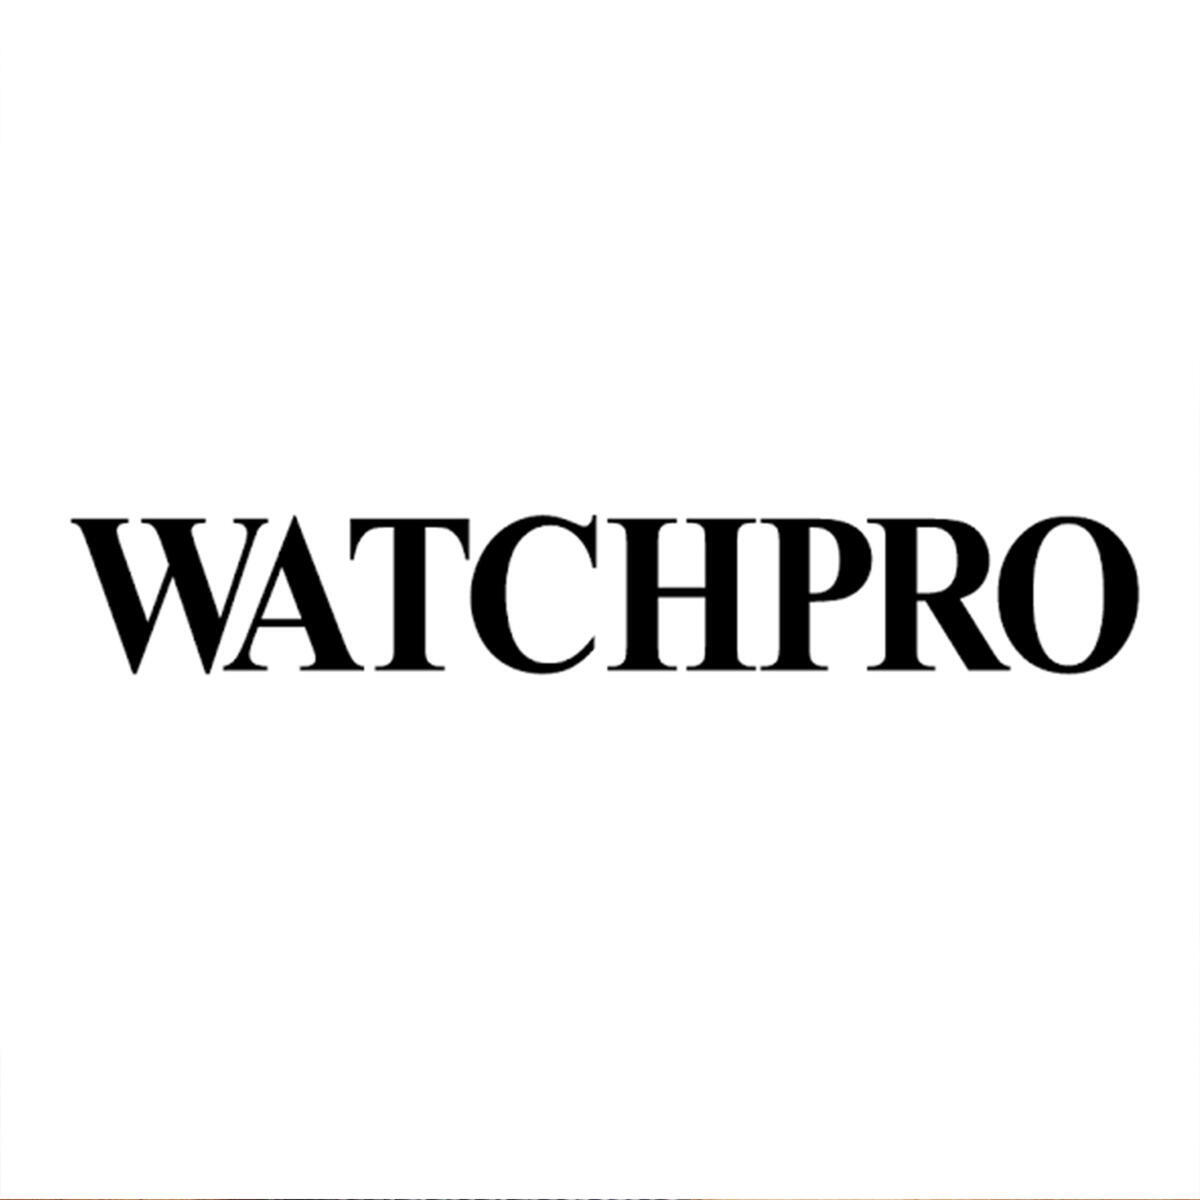 Watch pro review